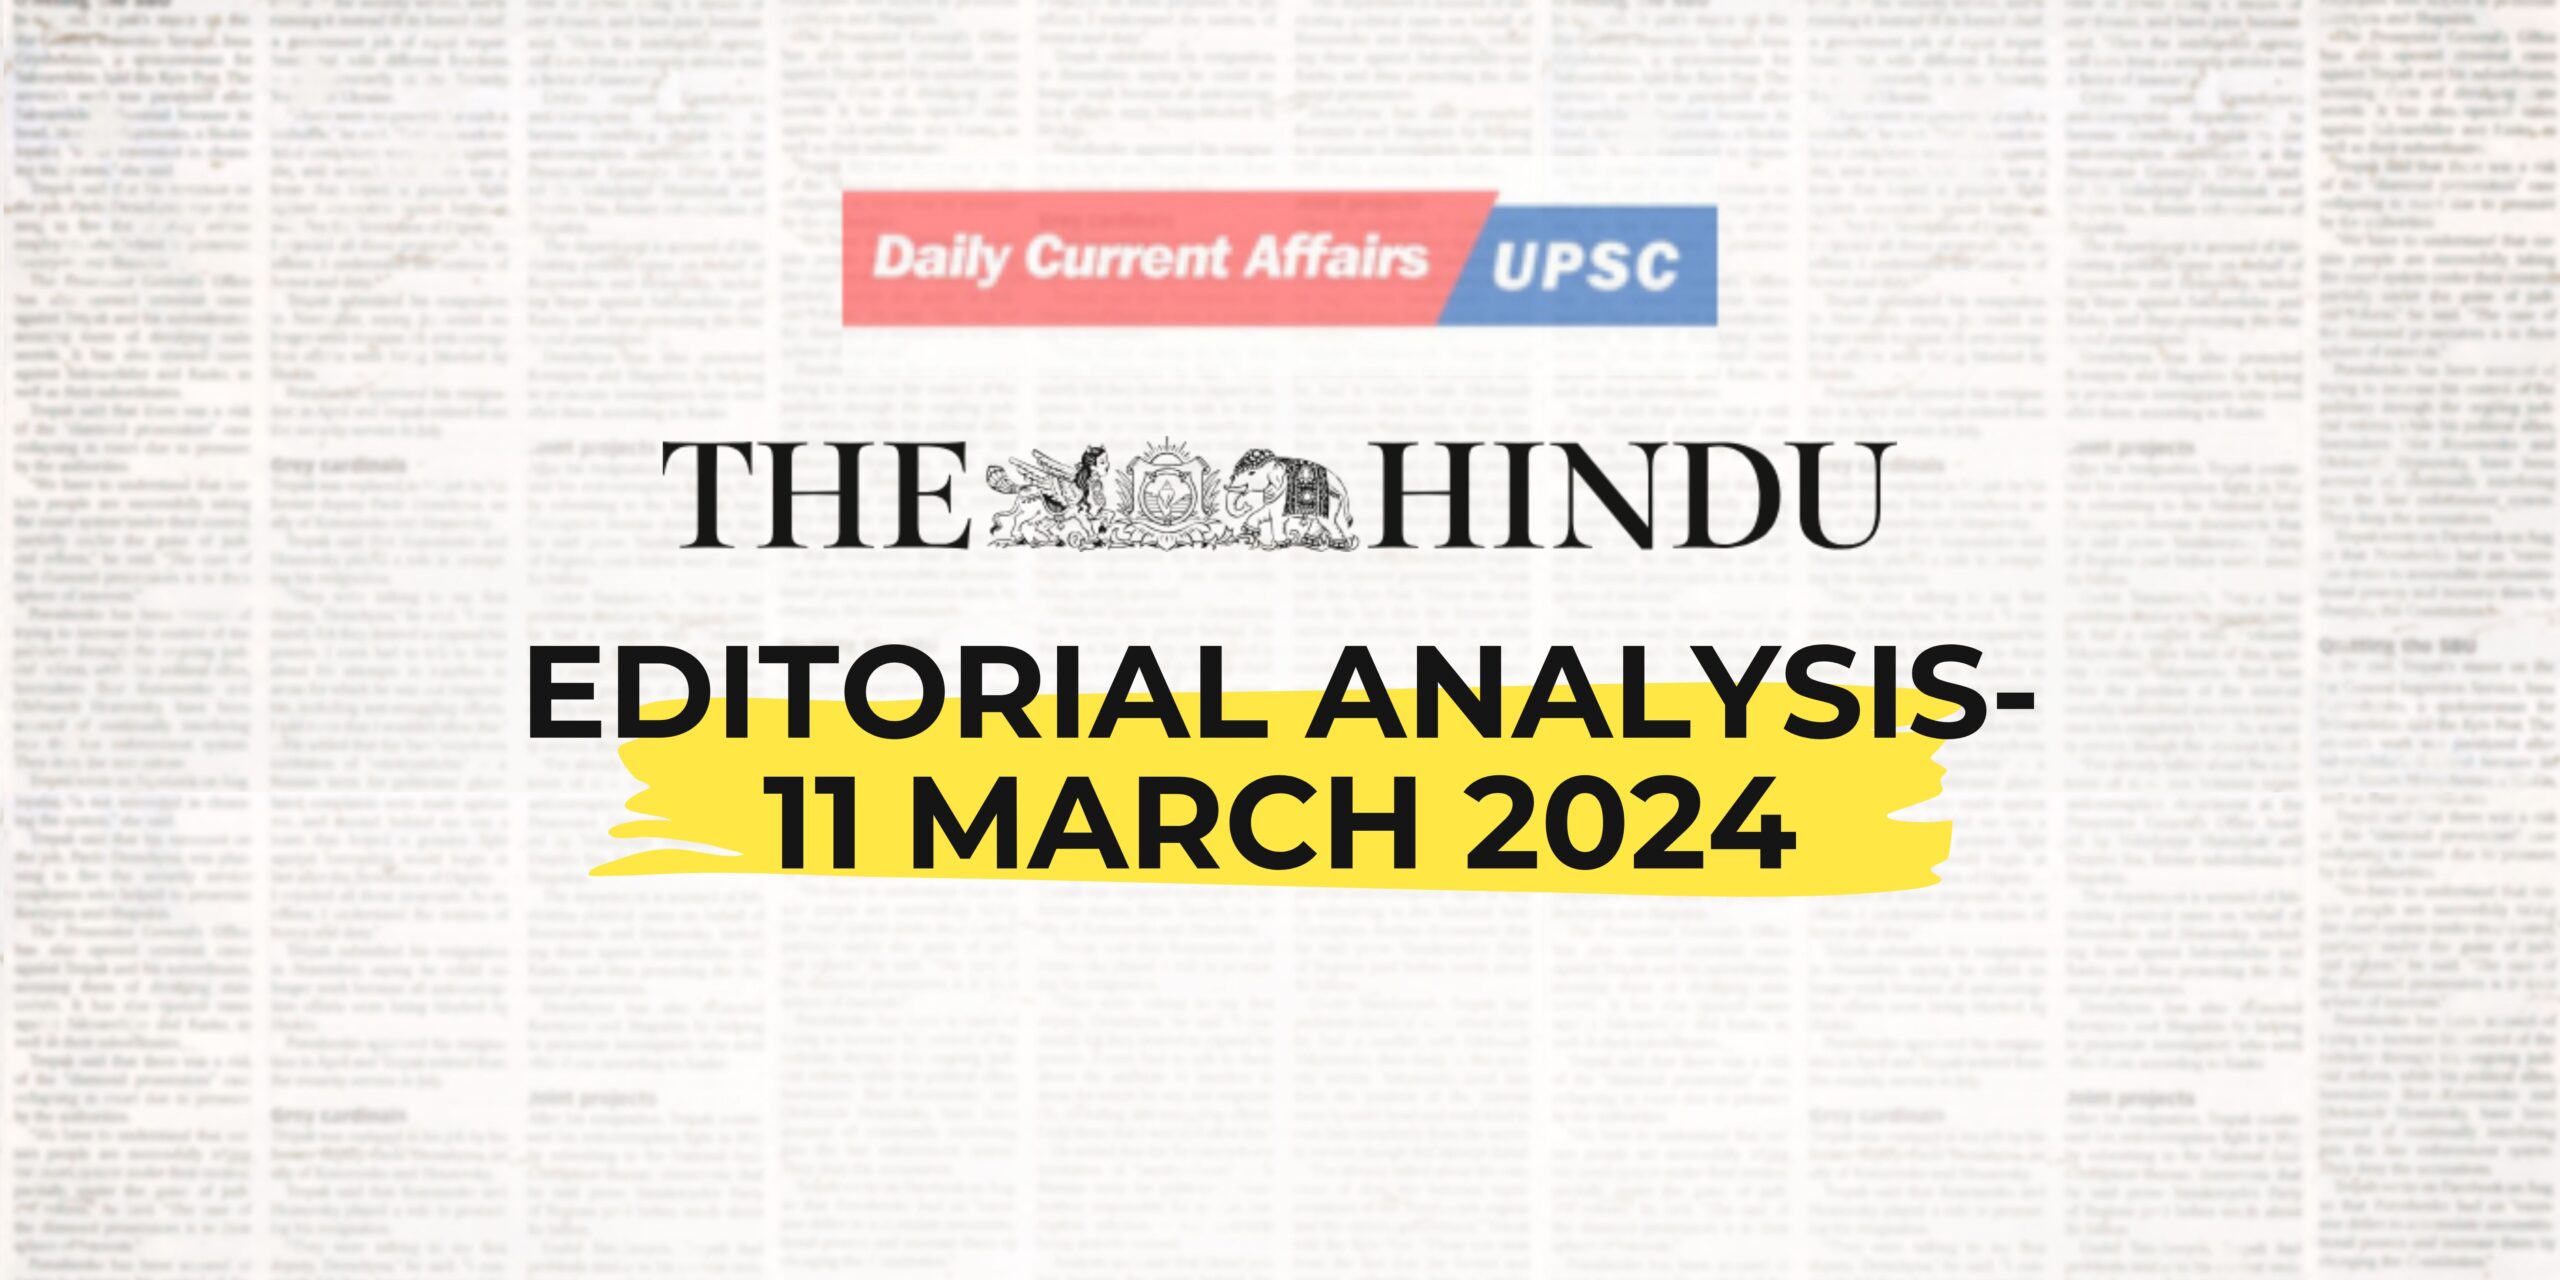 The Hindu Editorial Analysis- 11 March 2024